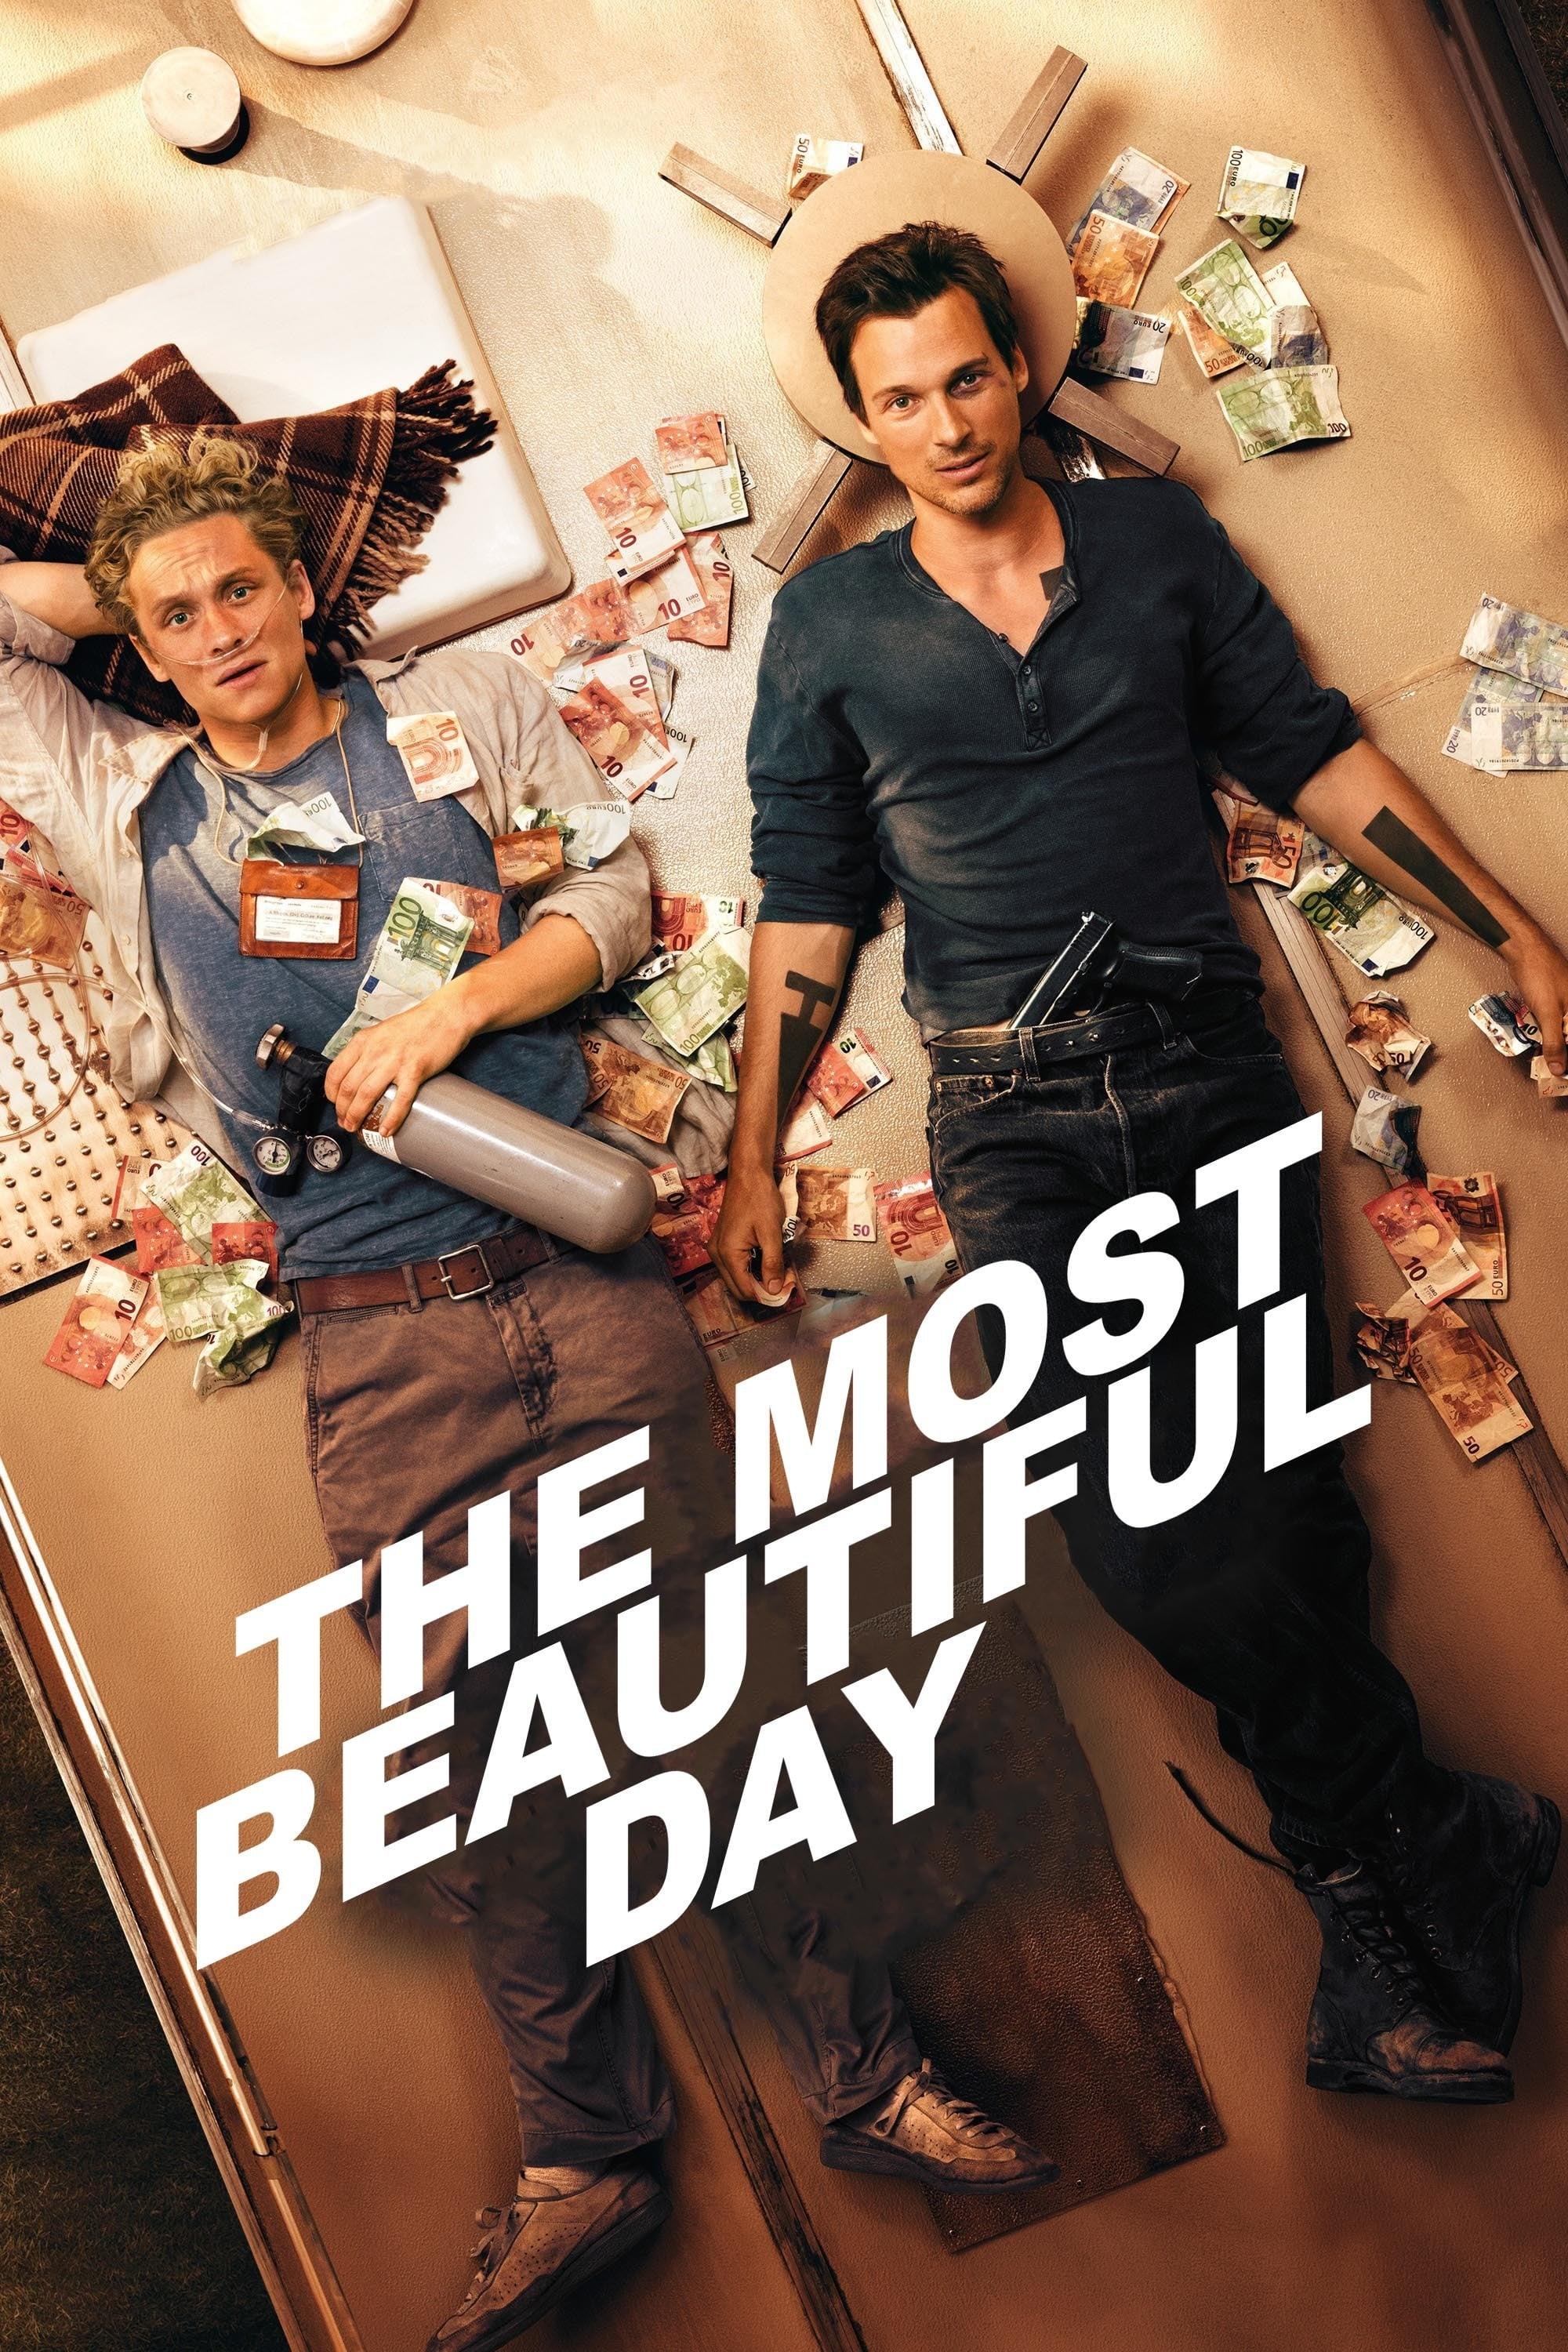 The Most Beautiful Day poster